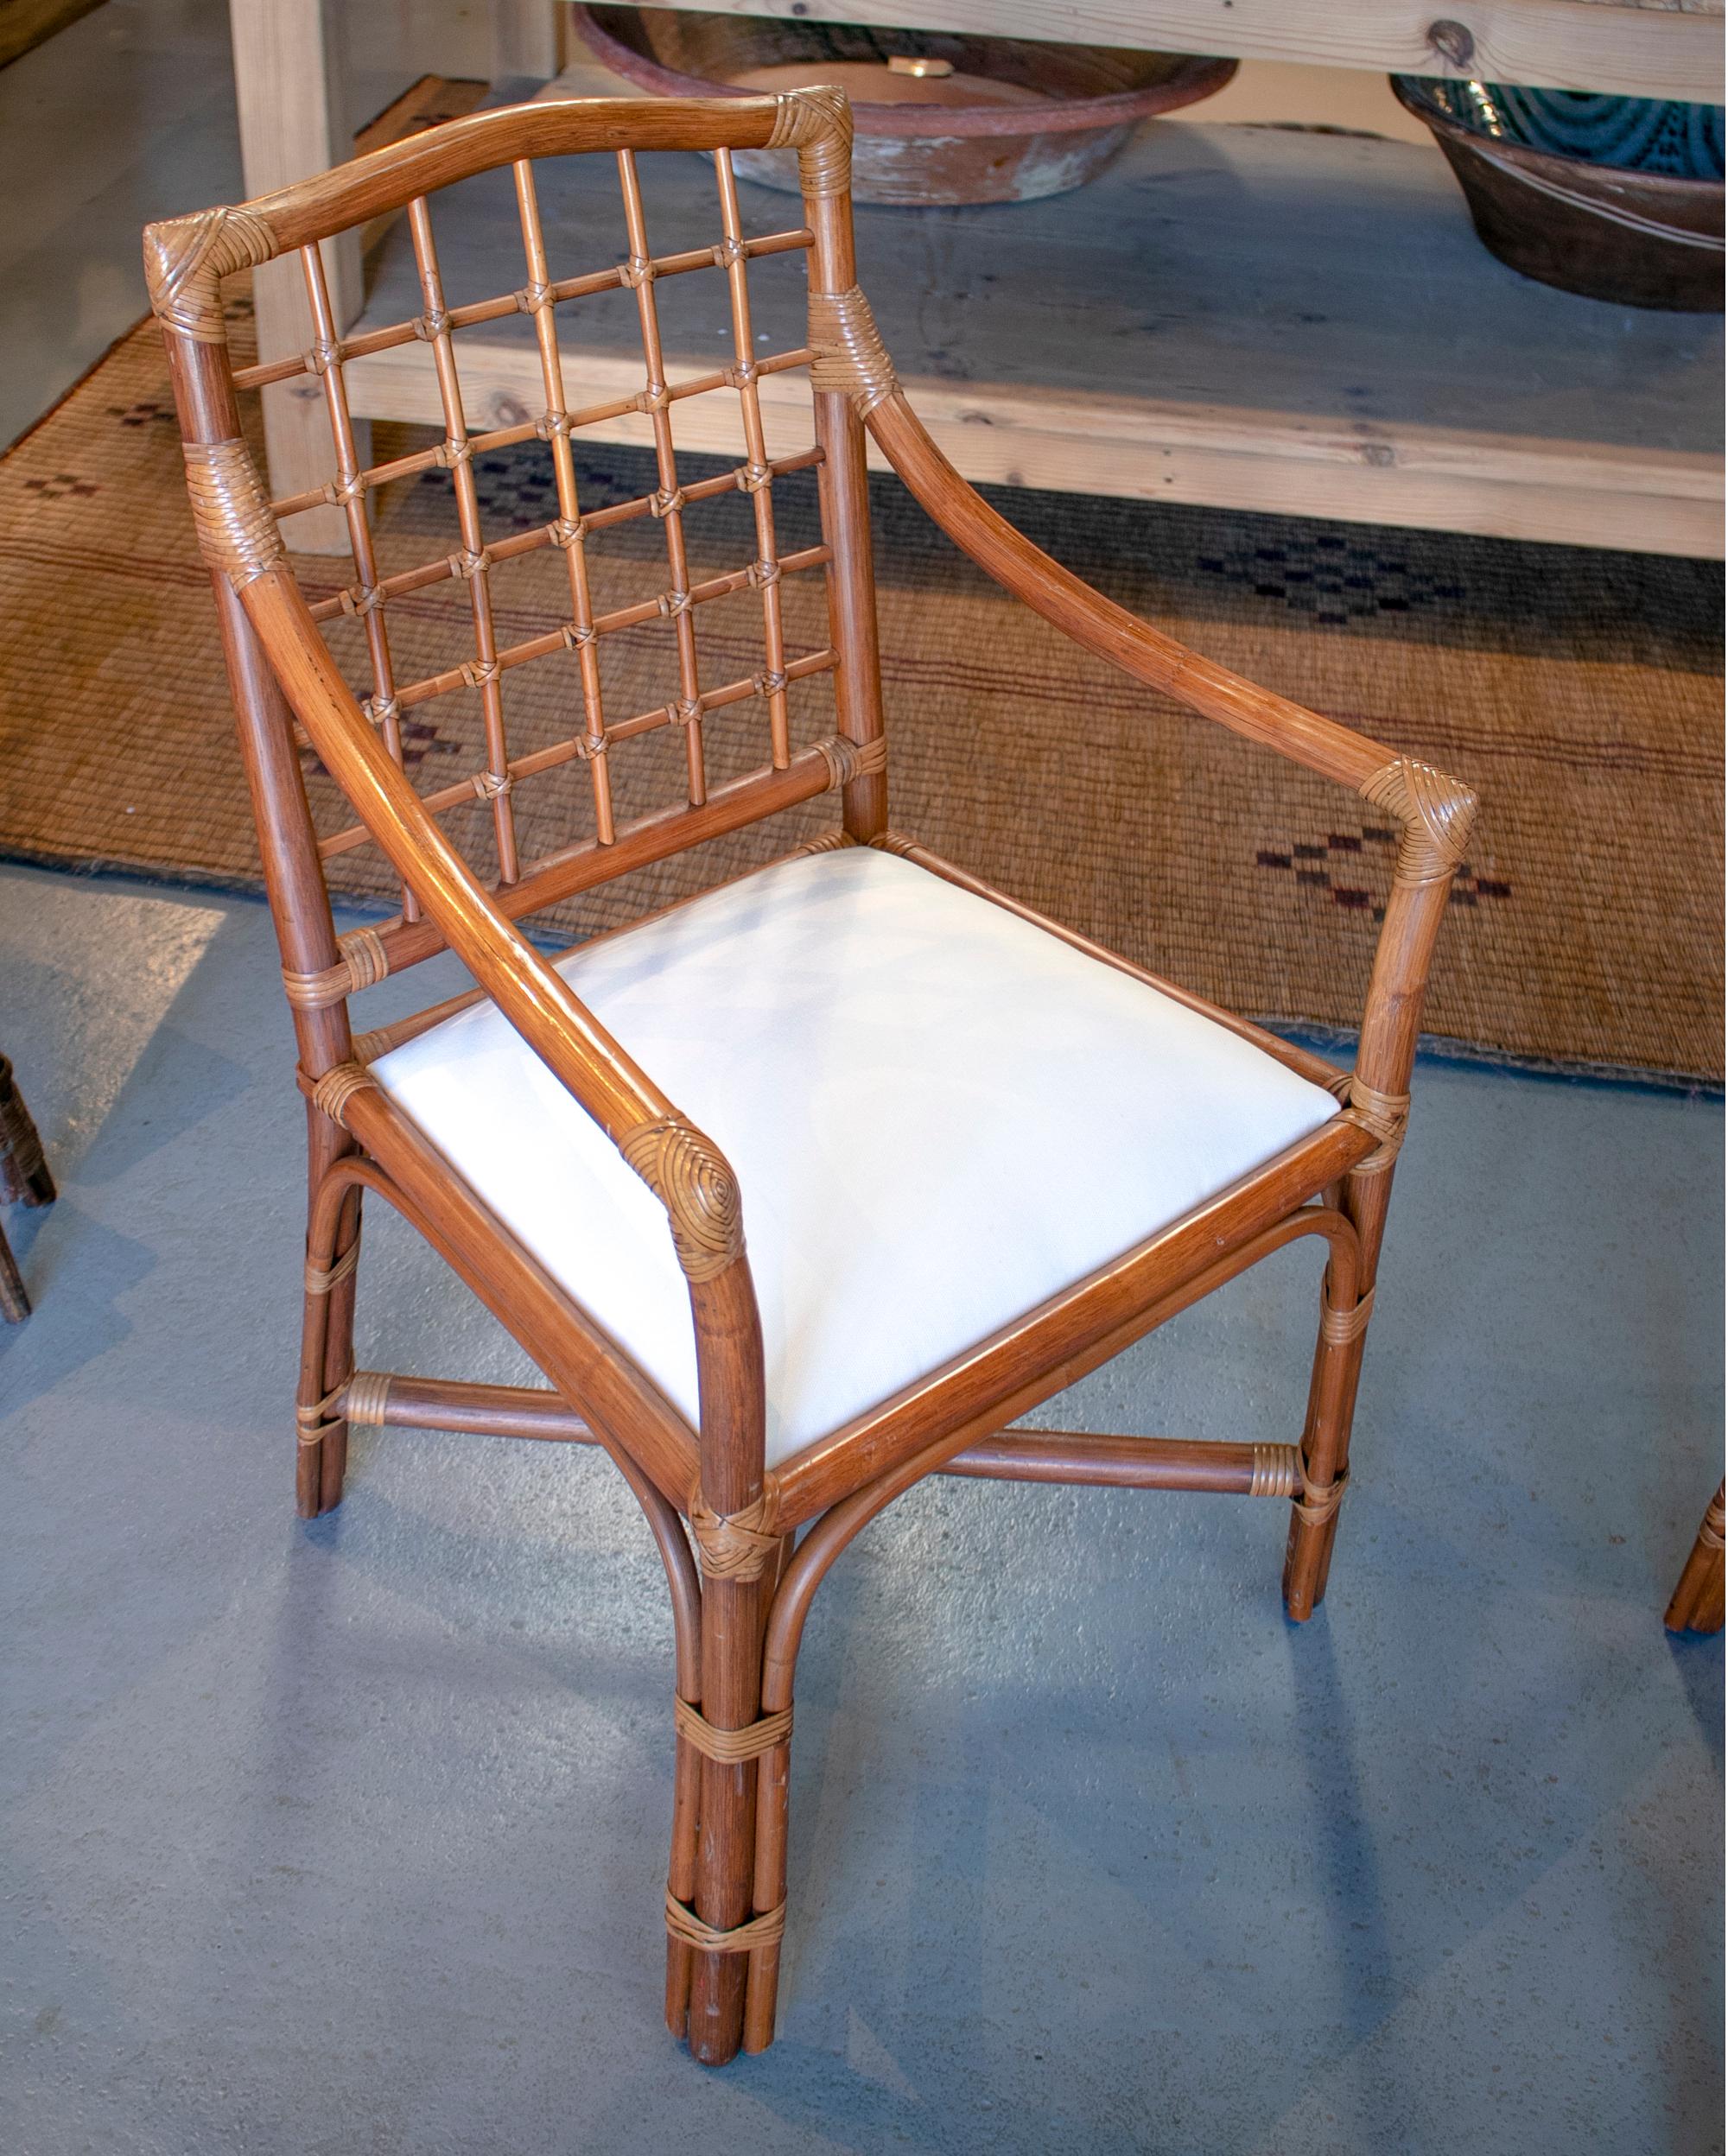 1980s Spanish set of four bamboo chairs with white upholstered seat cushions.